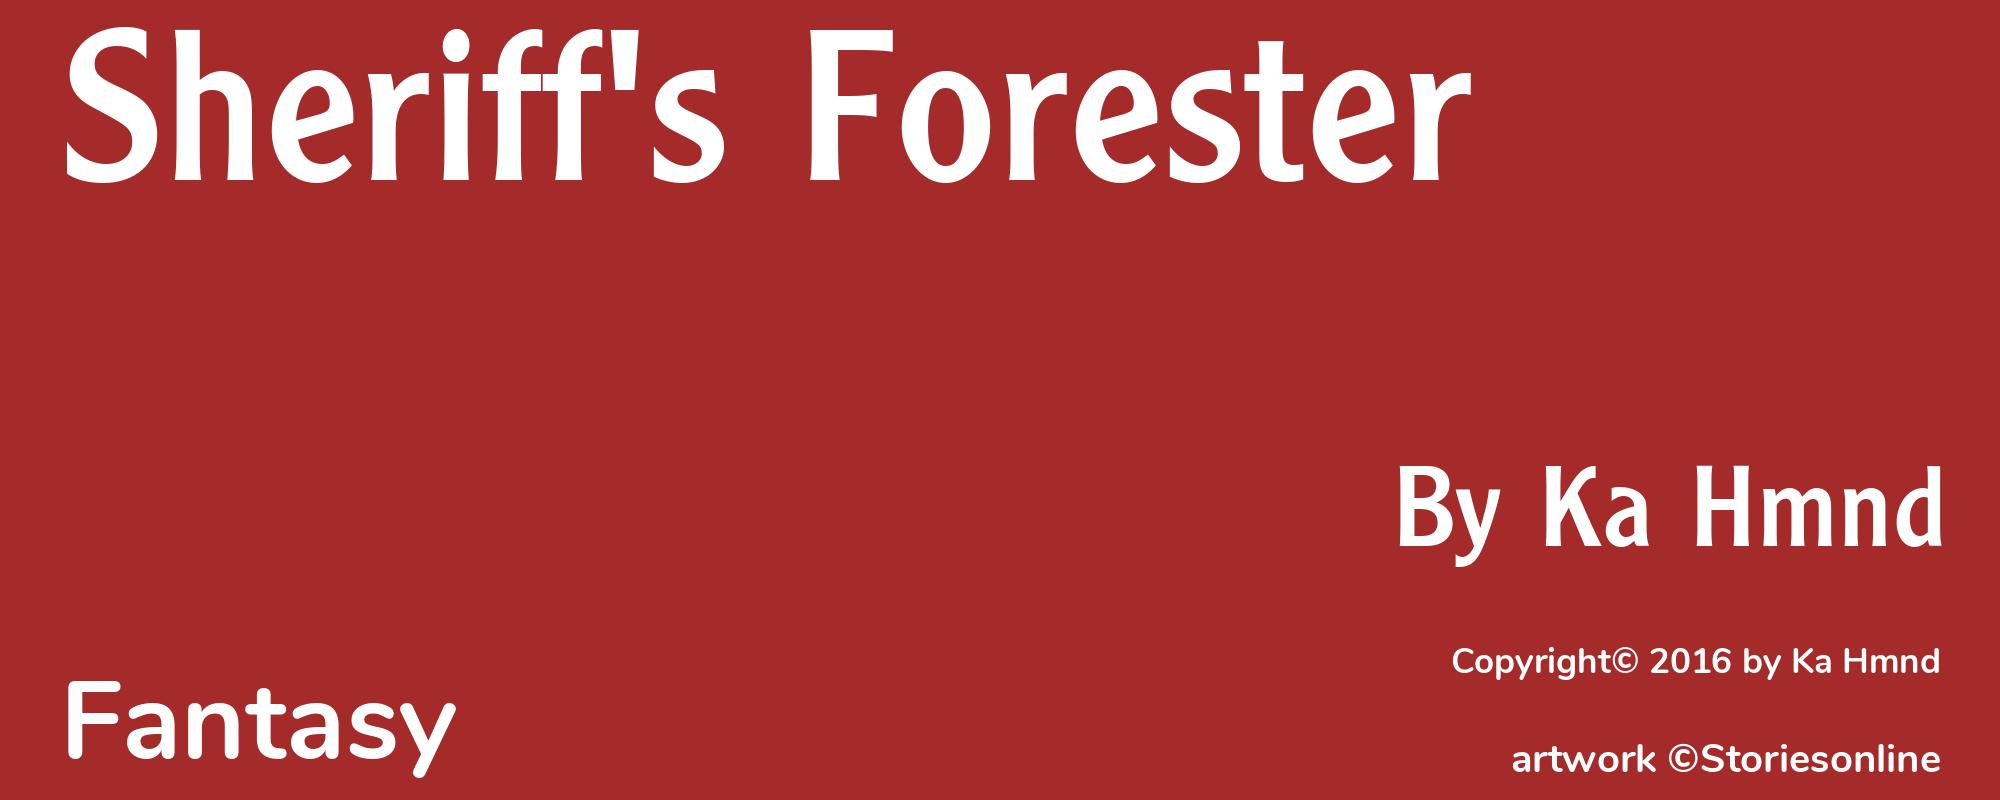 Sheriff's Forester - Cover